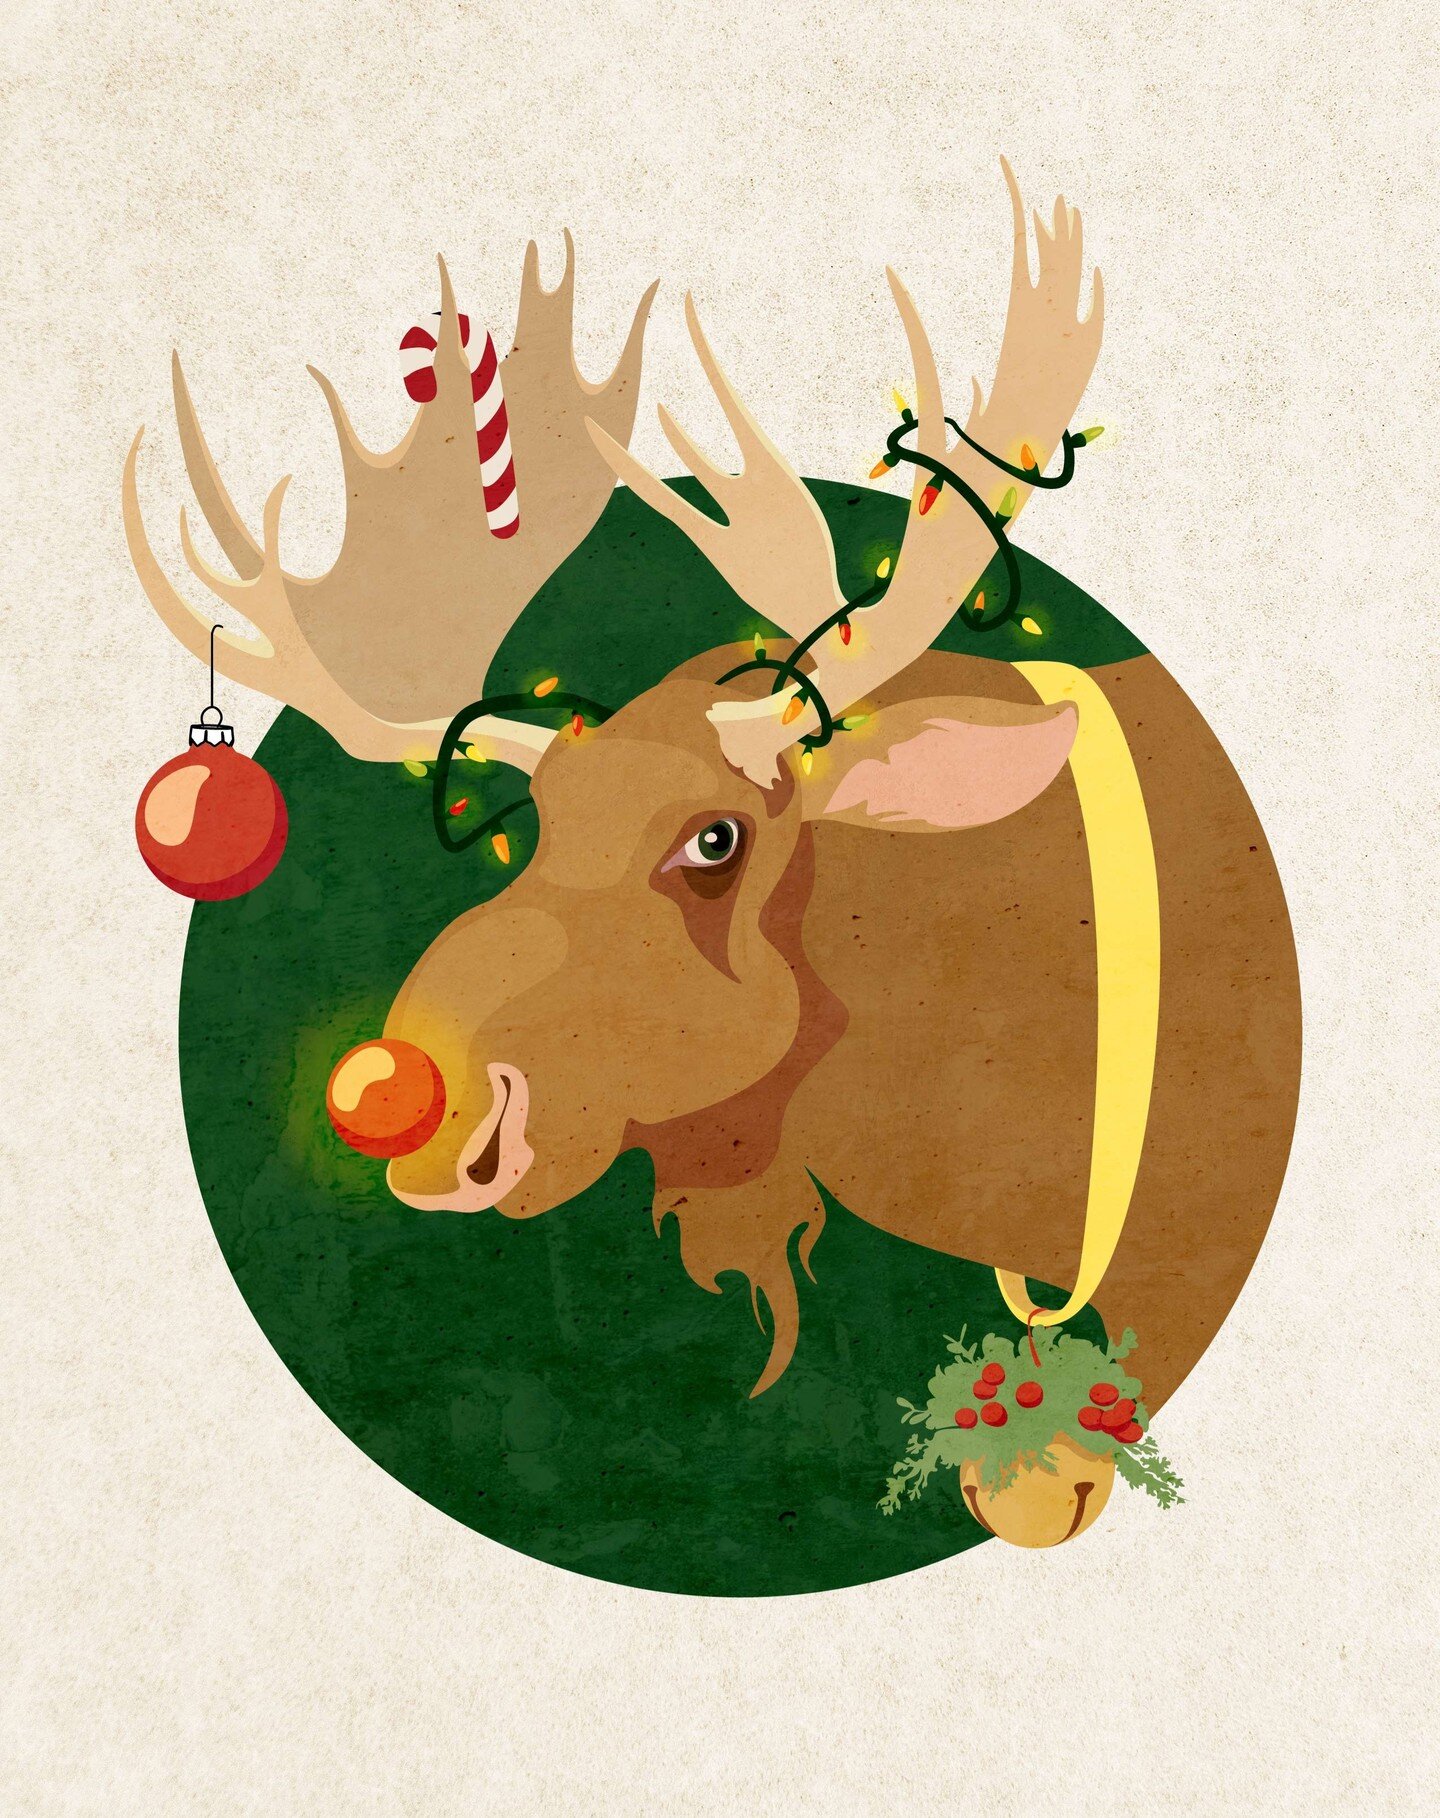 Re-posting my &quot;Christmoose&quot; from last year because I haven't done any holiday themed art for this month yet! And also because he's so cute I thought you might want to see him again.